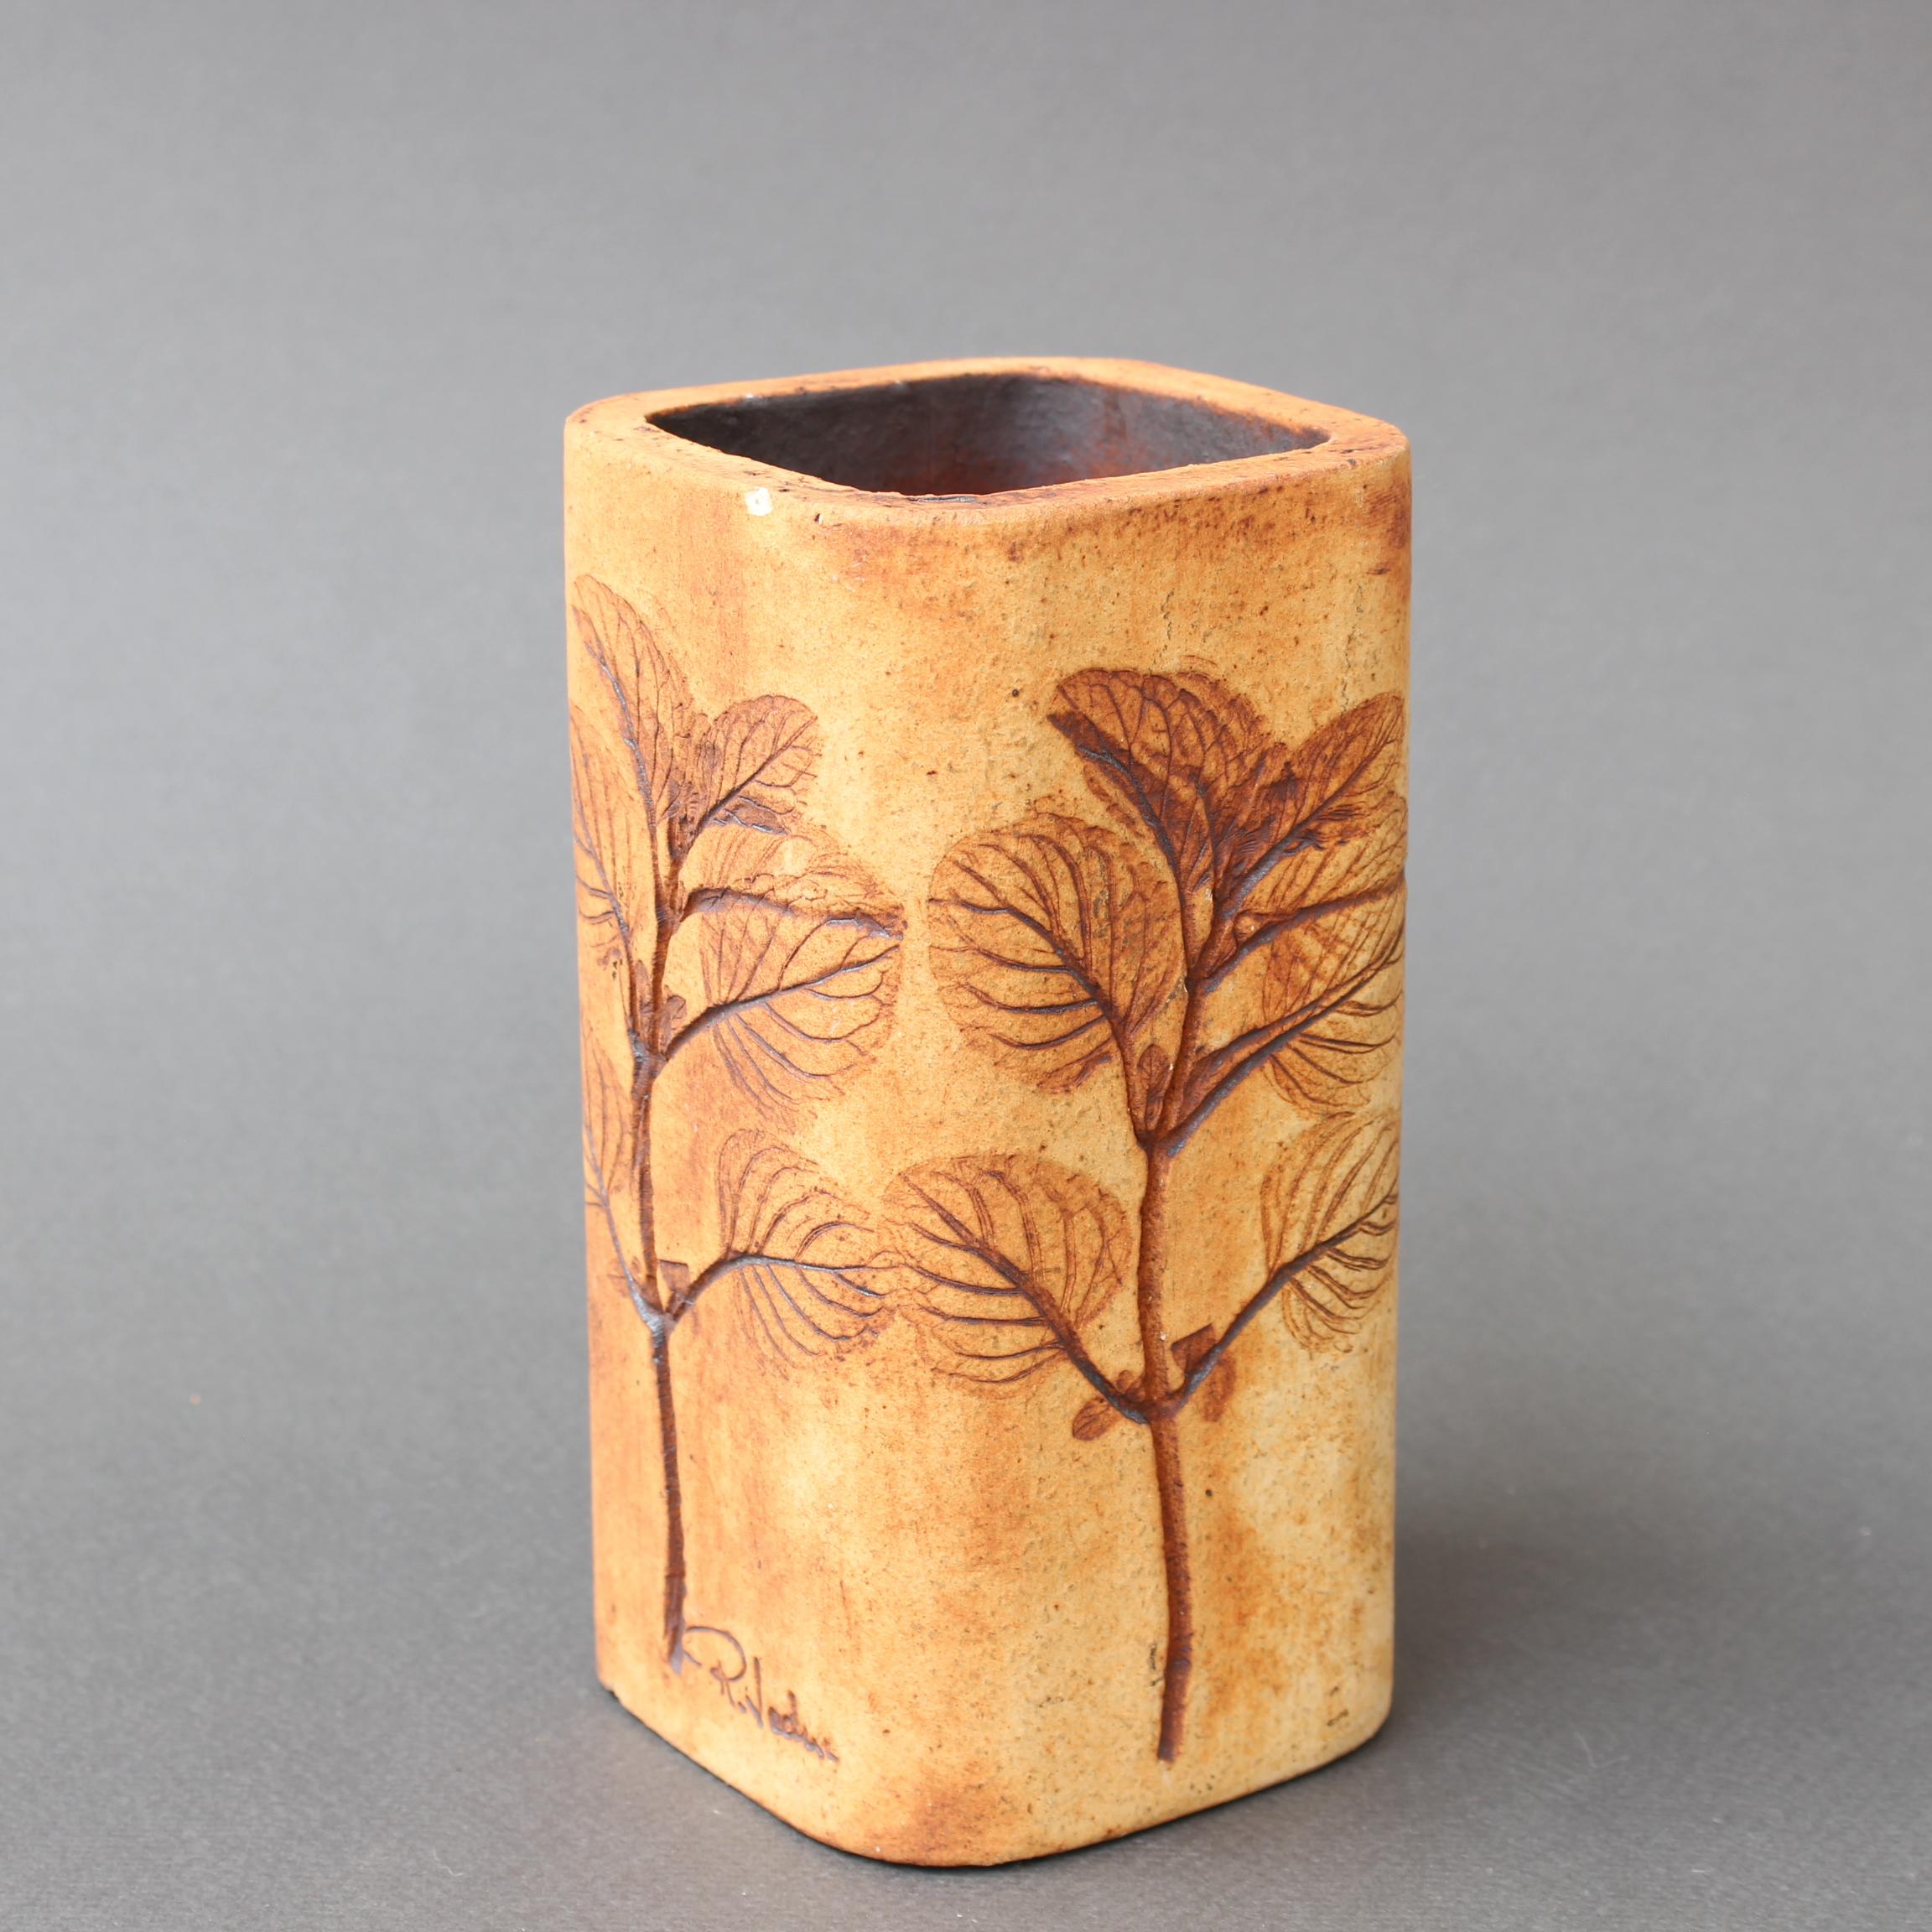 Vintage ceramic vase (or pencil holder if you prefer) by Raymonde Leduc (circa 1970s). Sandstone coloured small vessel with plant motifs inlaid on all four sides. In good overall condition with just a single, very slight visible chip under the lip